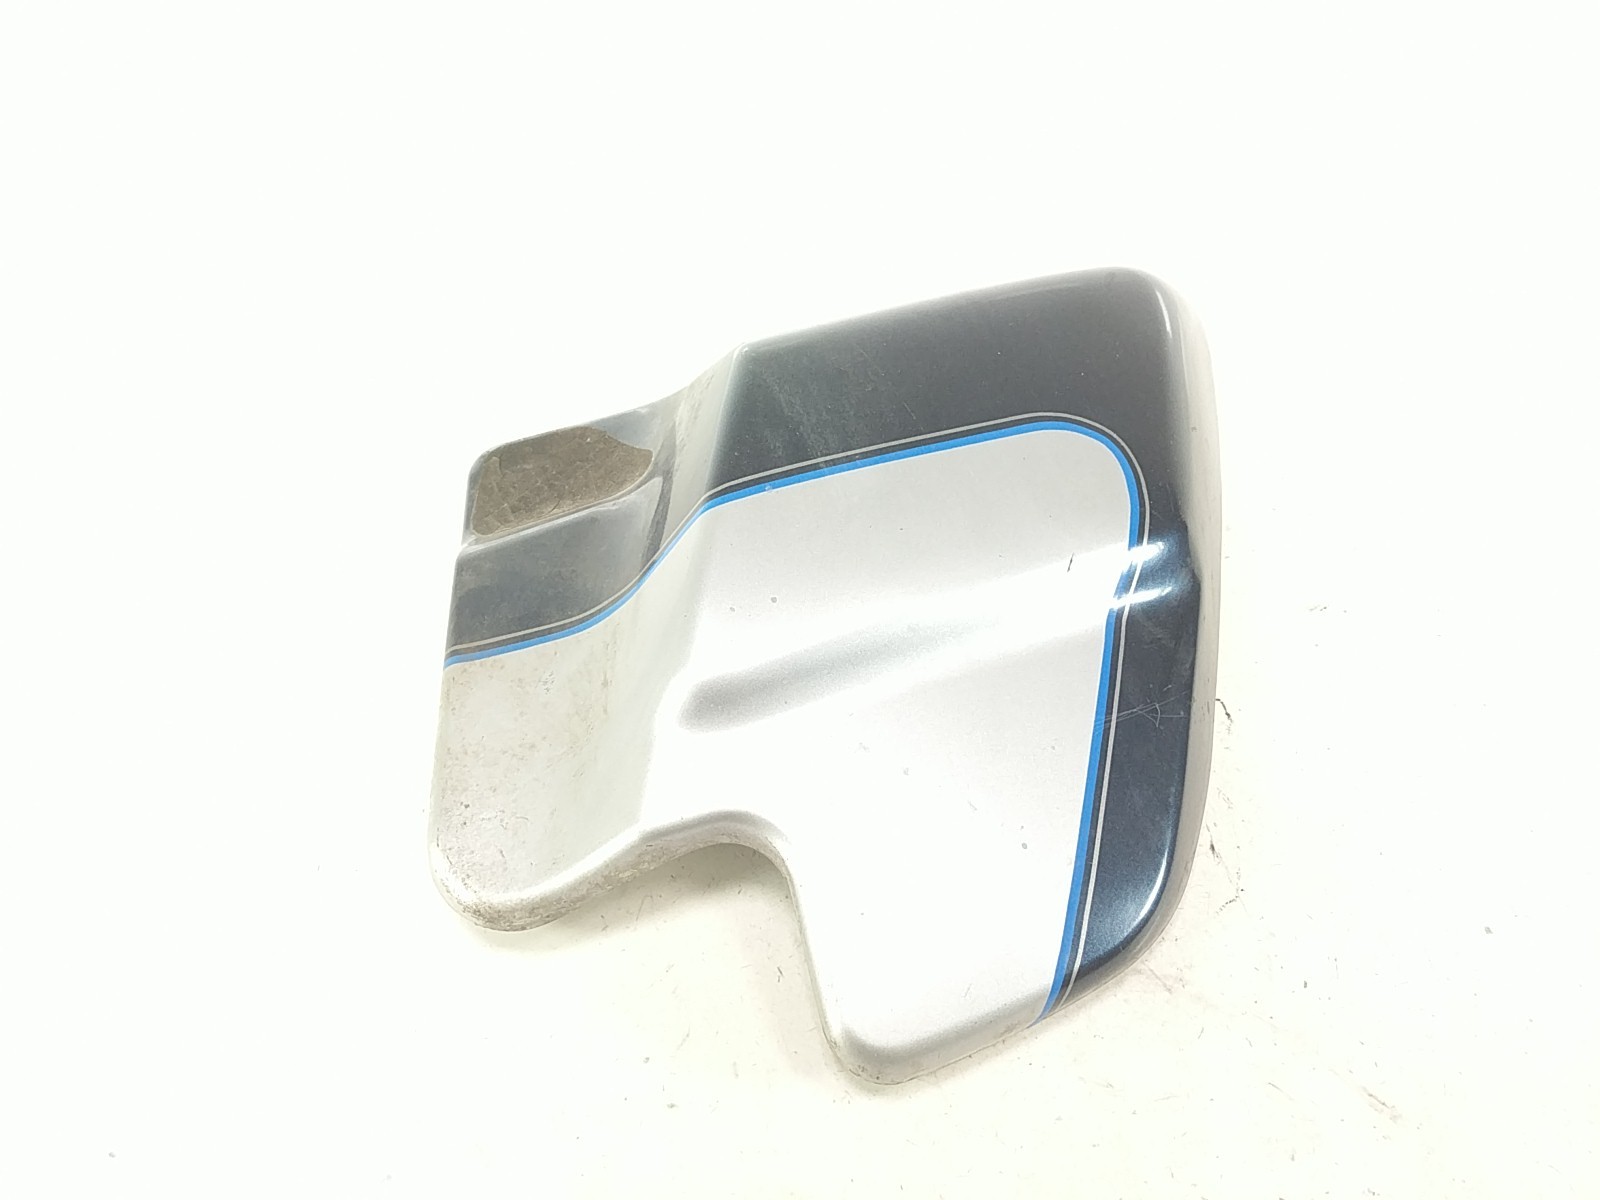 01 Harley Davidson Ultra Classic FLHT Right Side Cover Lower Seat Panel